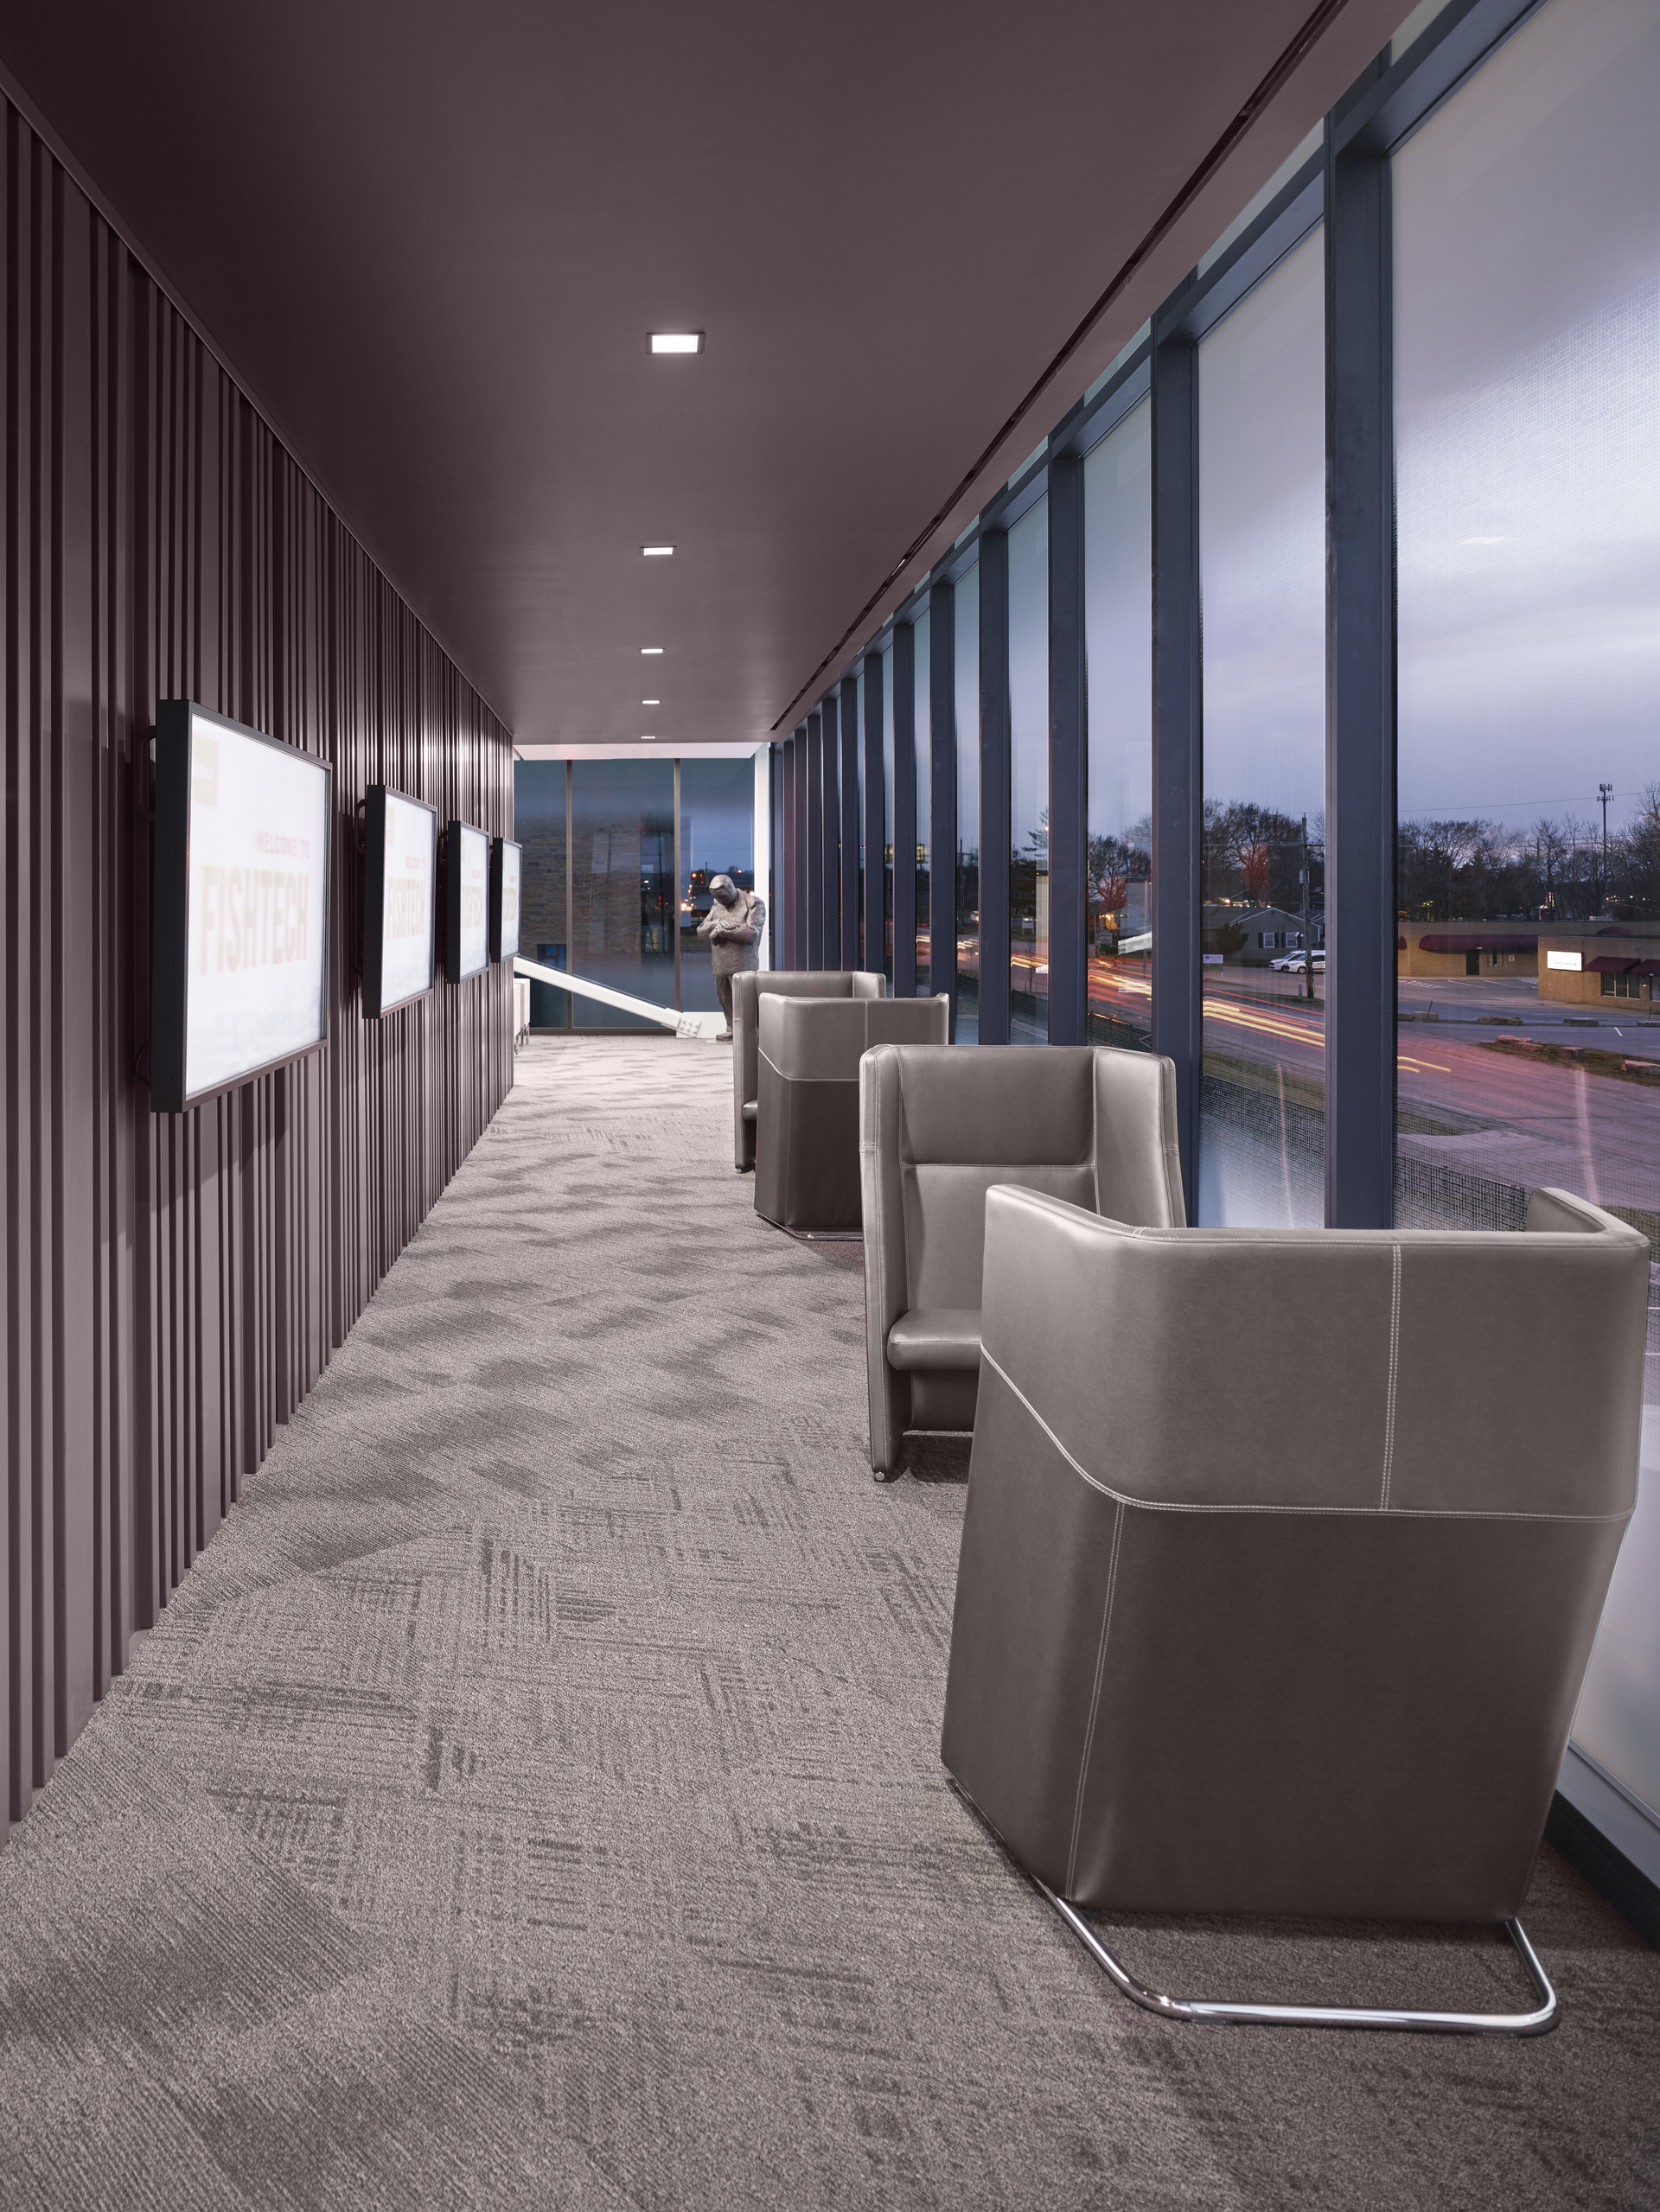 Hallway with textured wall, floor-to-ceiling windows, seating